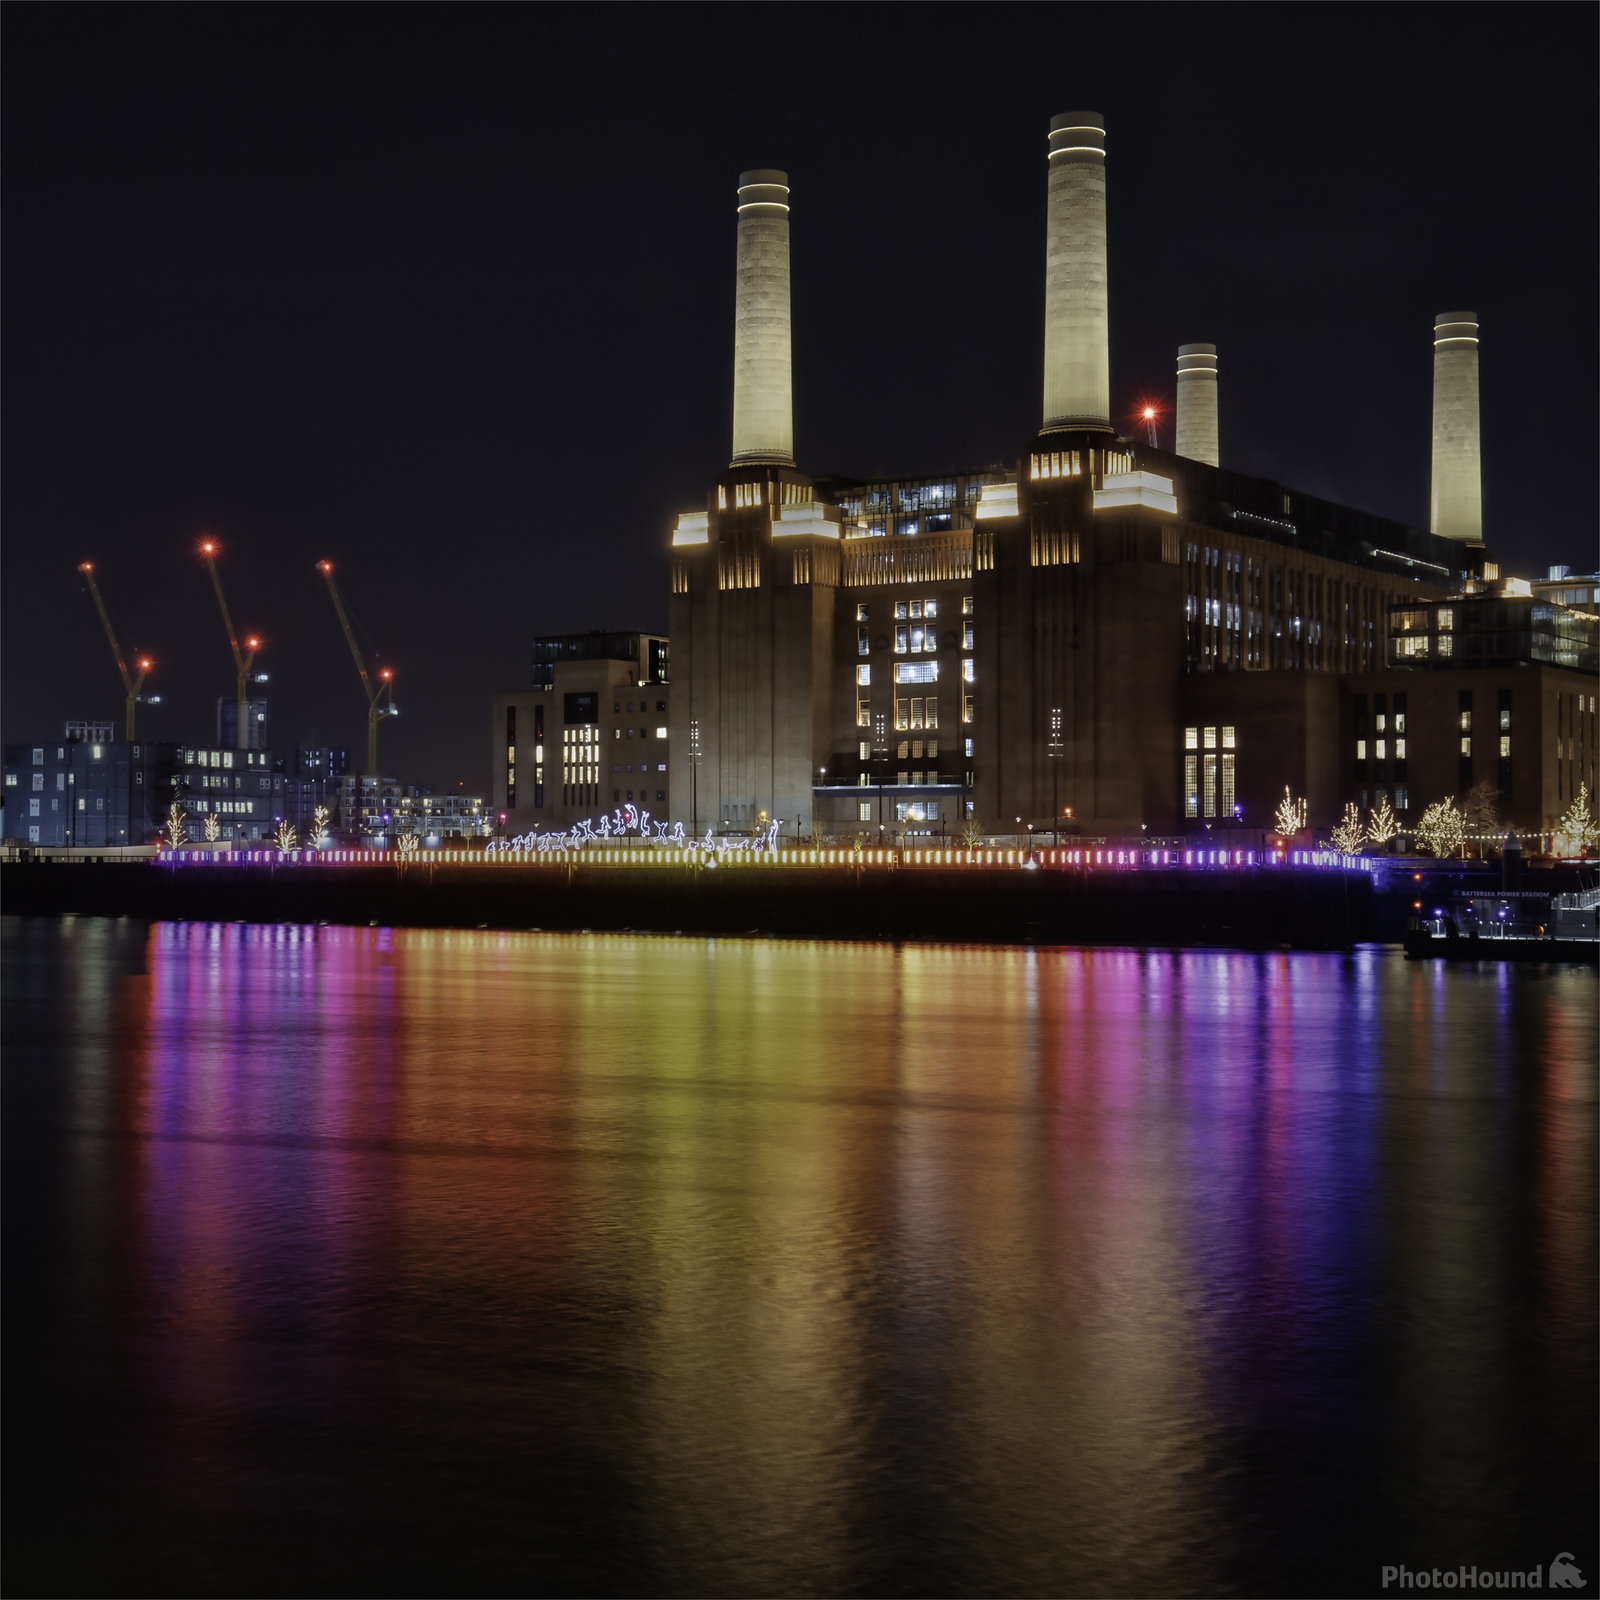 Image of View of Battersea Power Station by Paul James